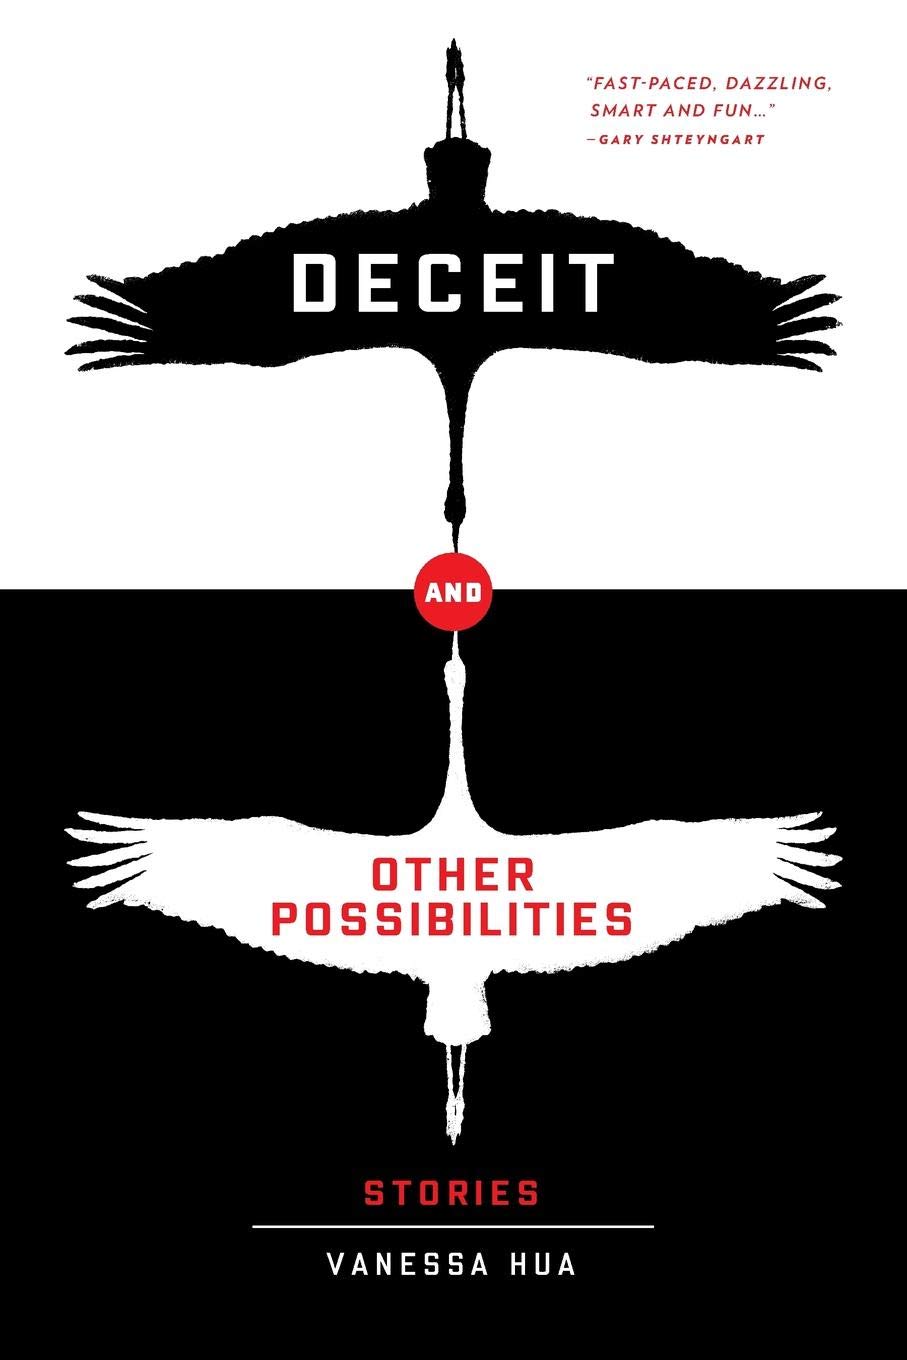 Deceit and Other Possibilities